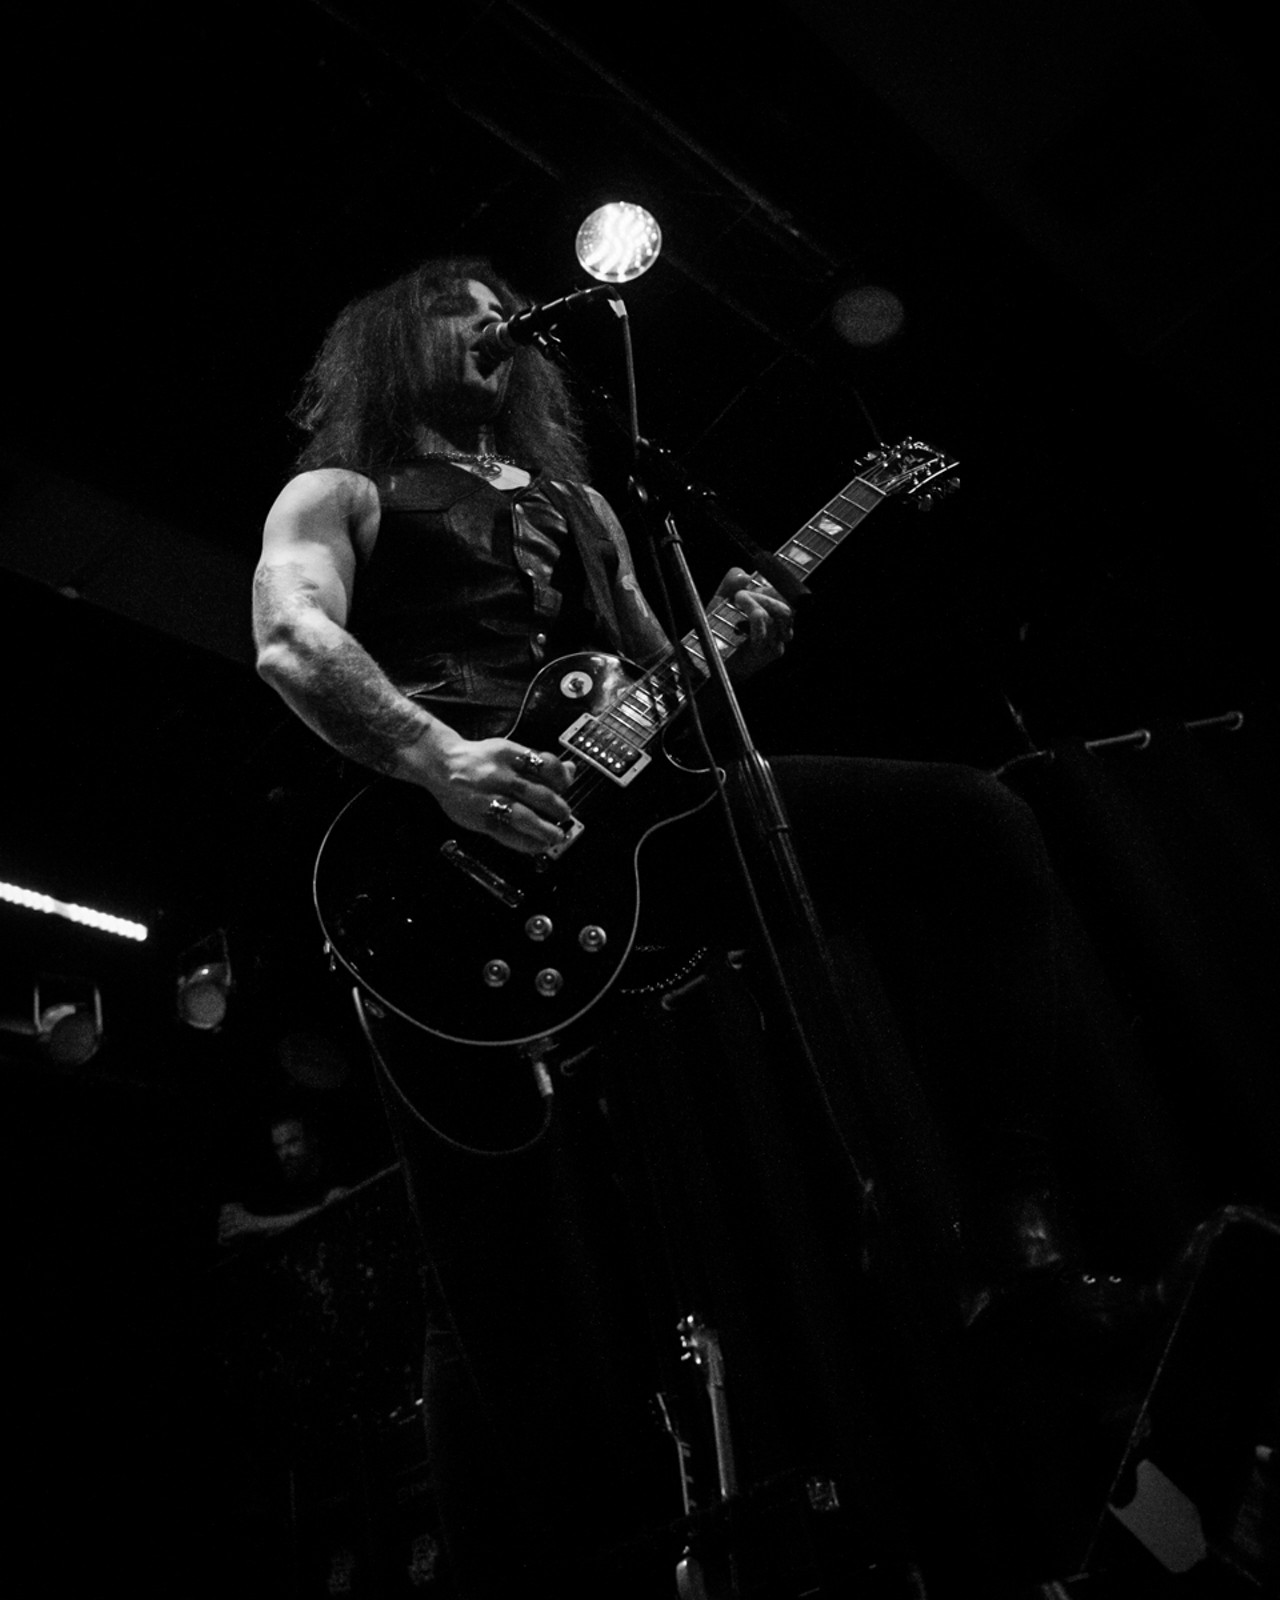 Photos of Rotting Christ and Borknagar playing Orpheum in Ybor City